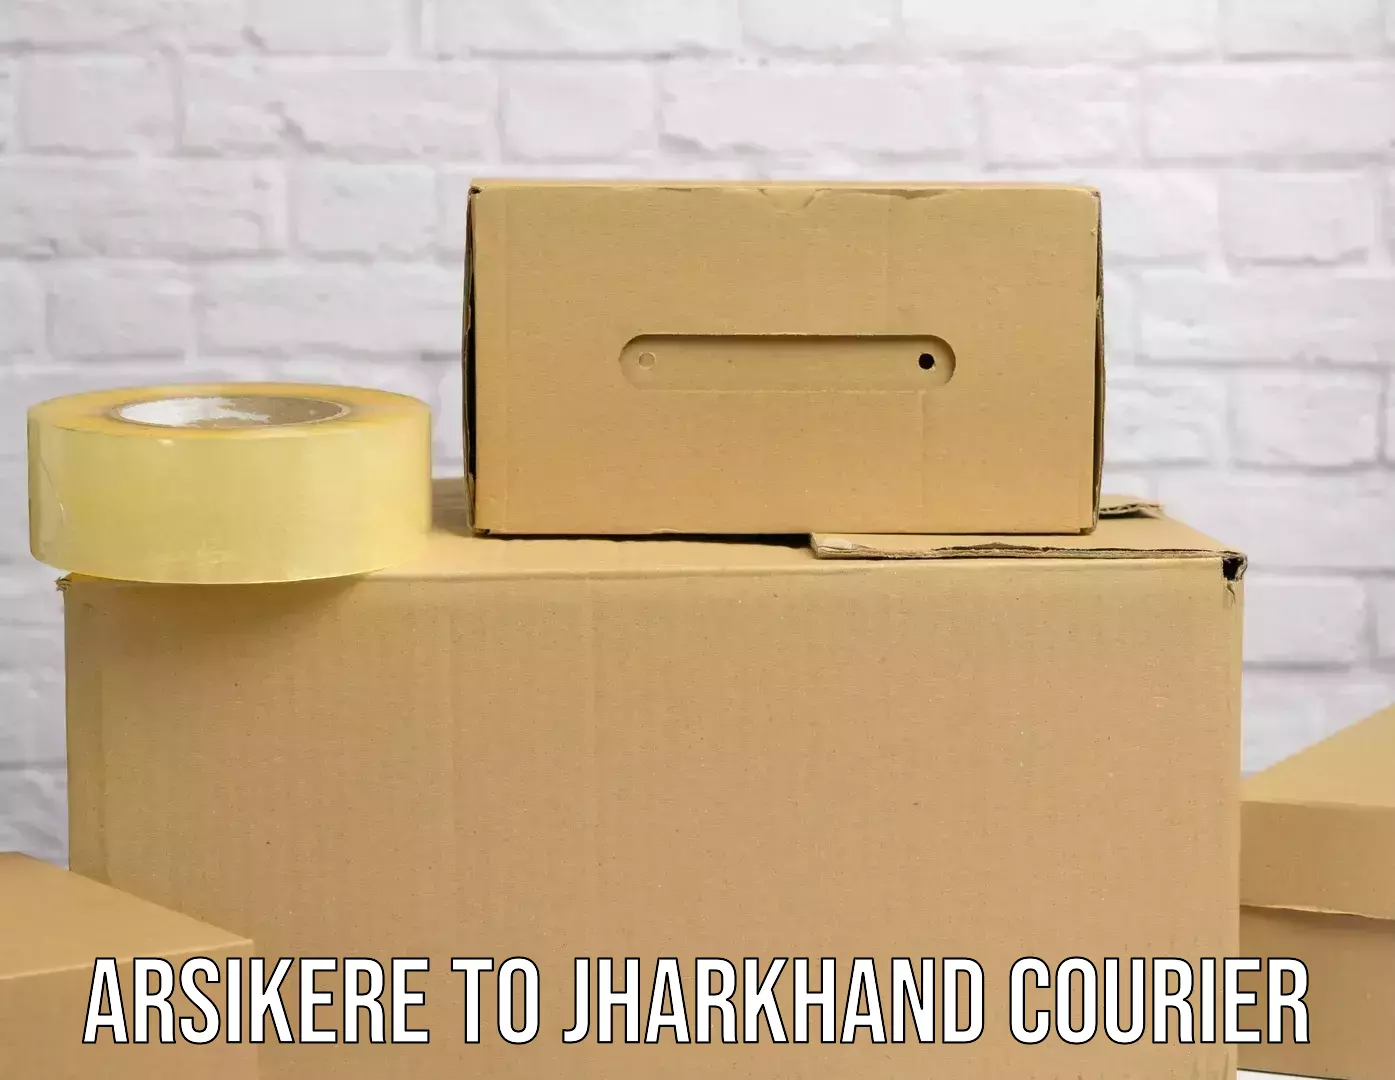 Express package transport Arsikere to IIT Dhanbad